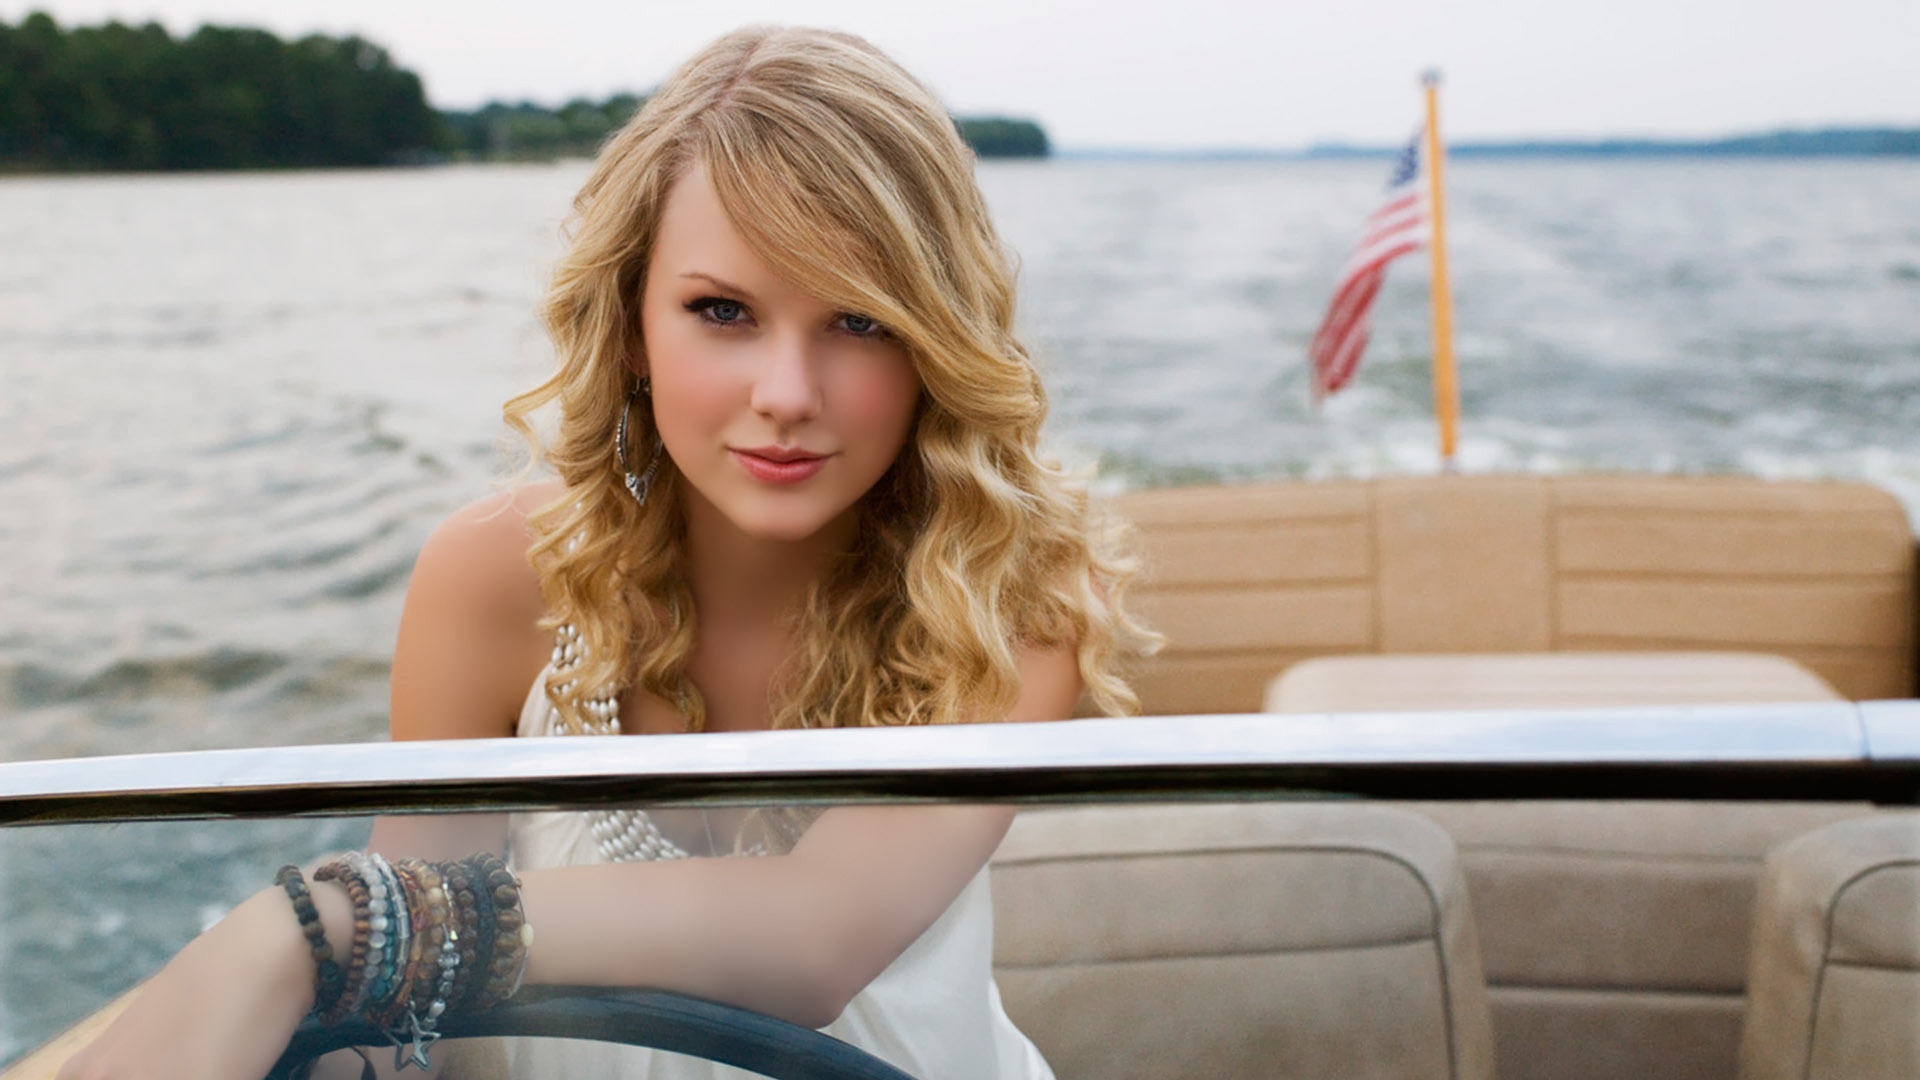 Taylor Swift Sailor for 1920 x 1080 HDTV 1080p resolution